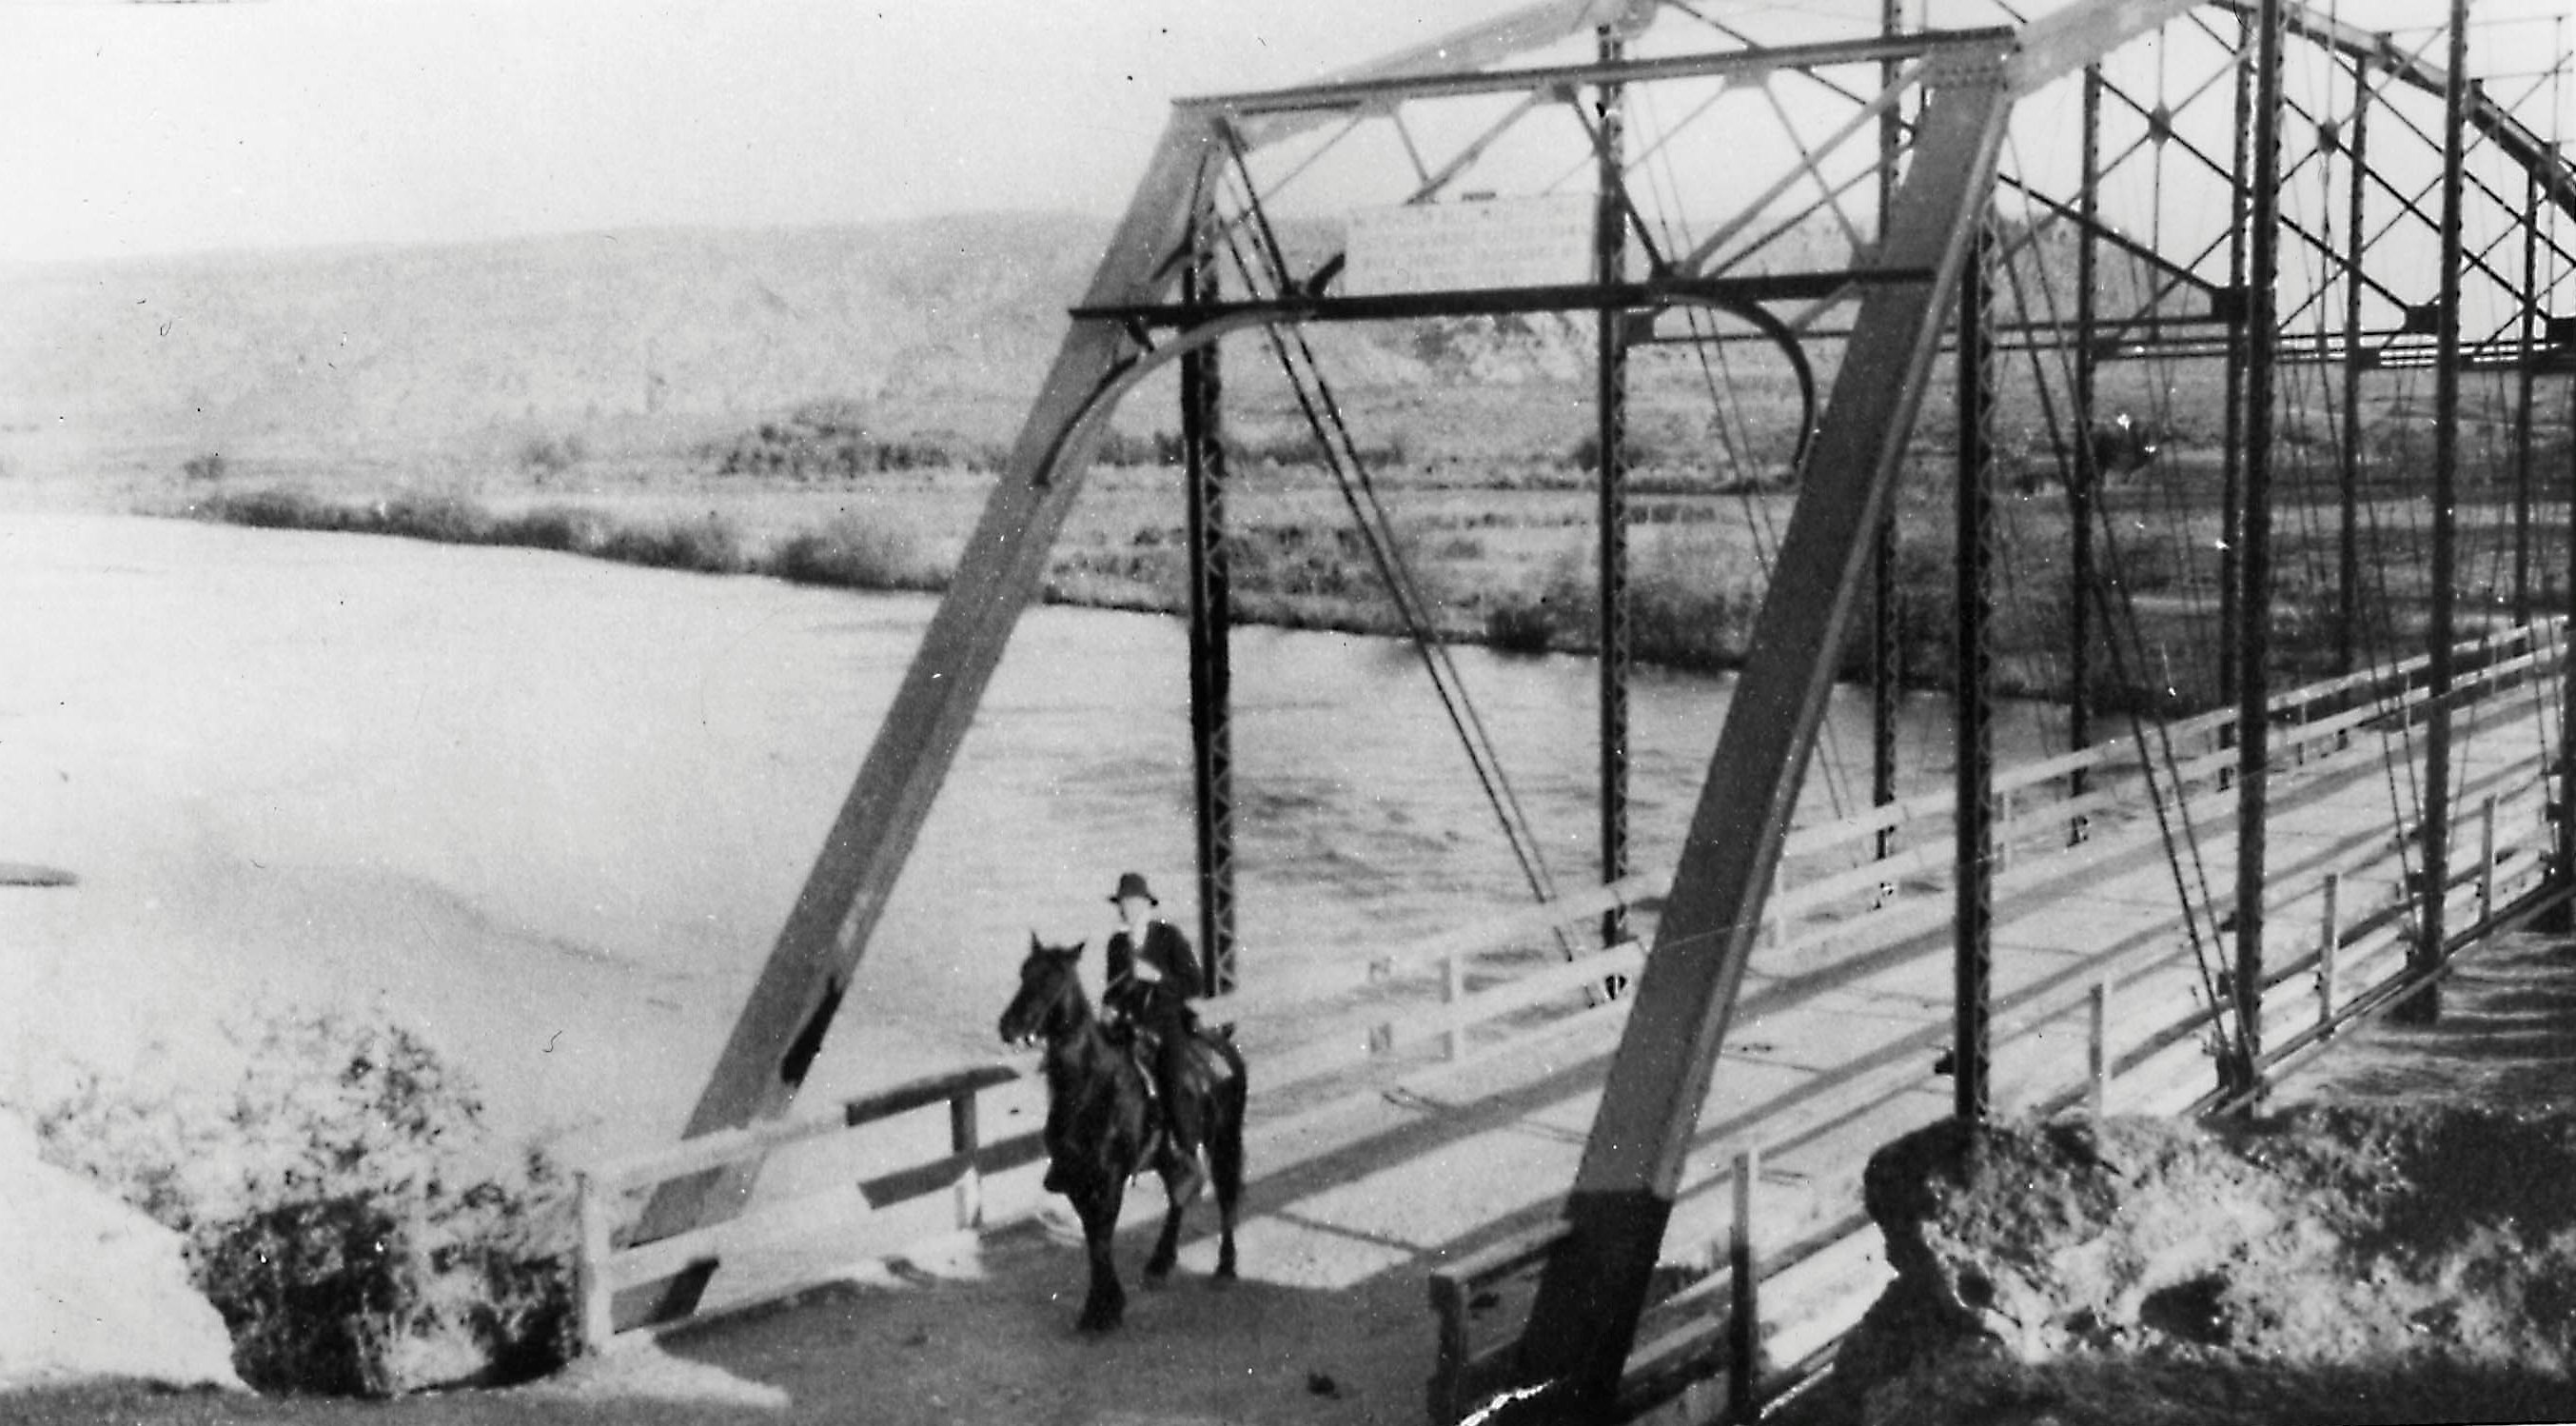 Horse and rider on the Virgin River Bridge